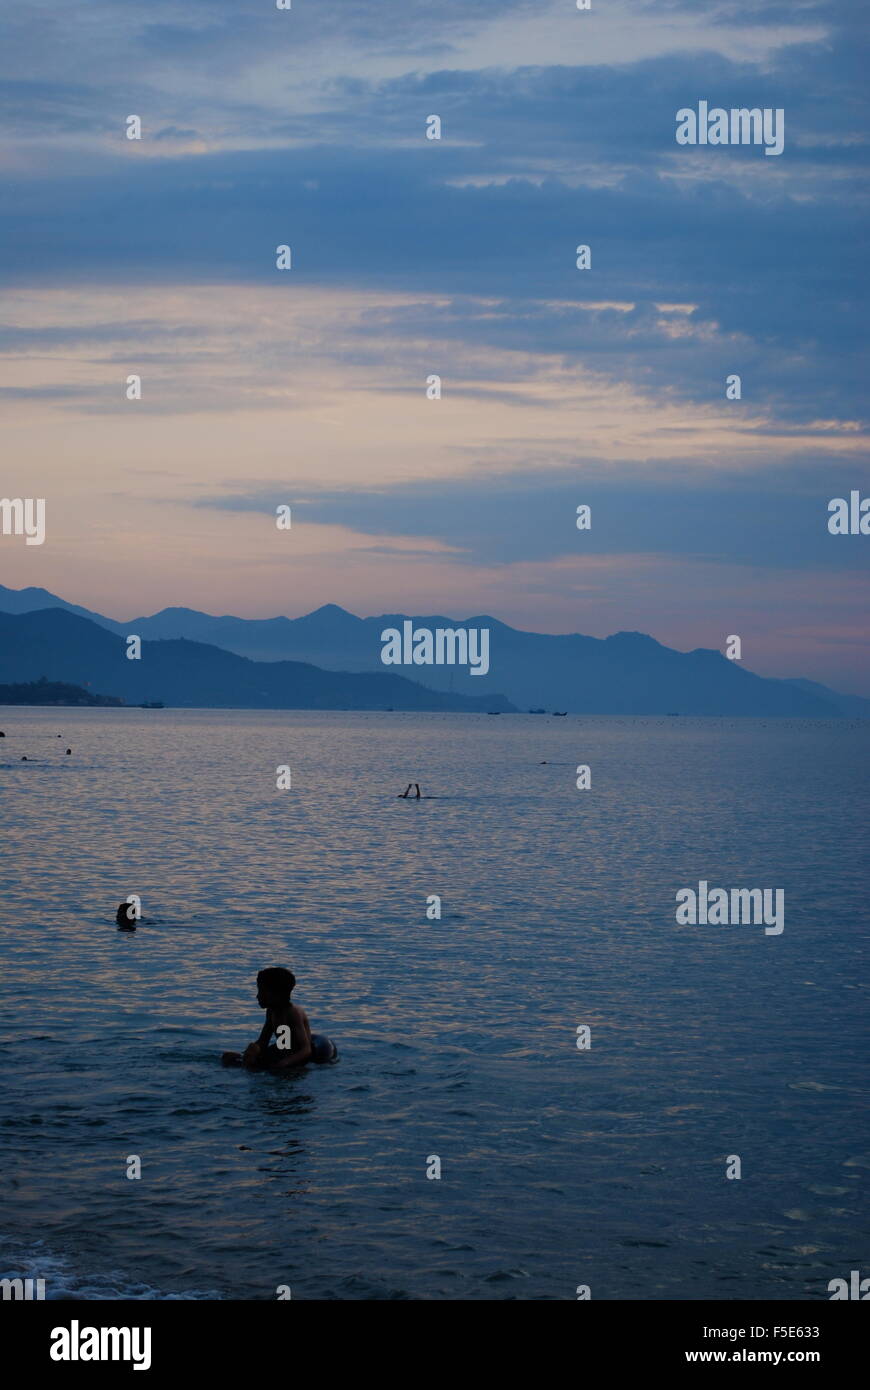 View of locals on the city beach in Nha Trang, Vietnam. Stock Photo